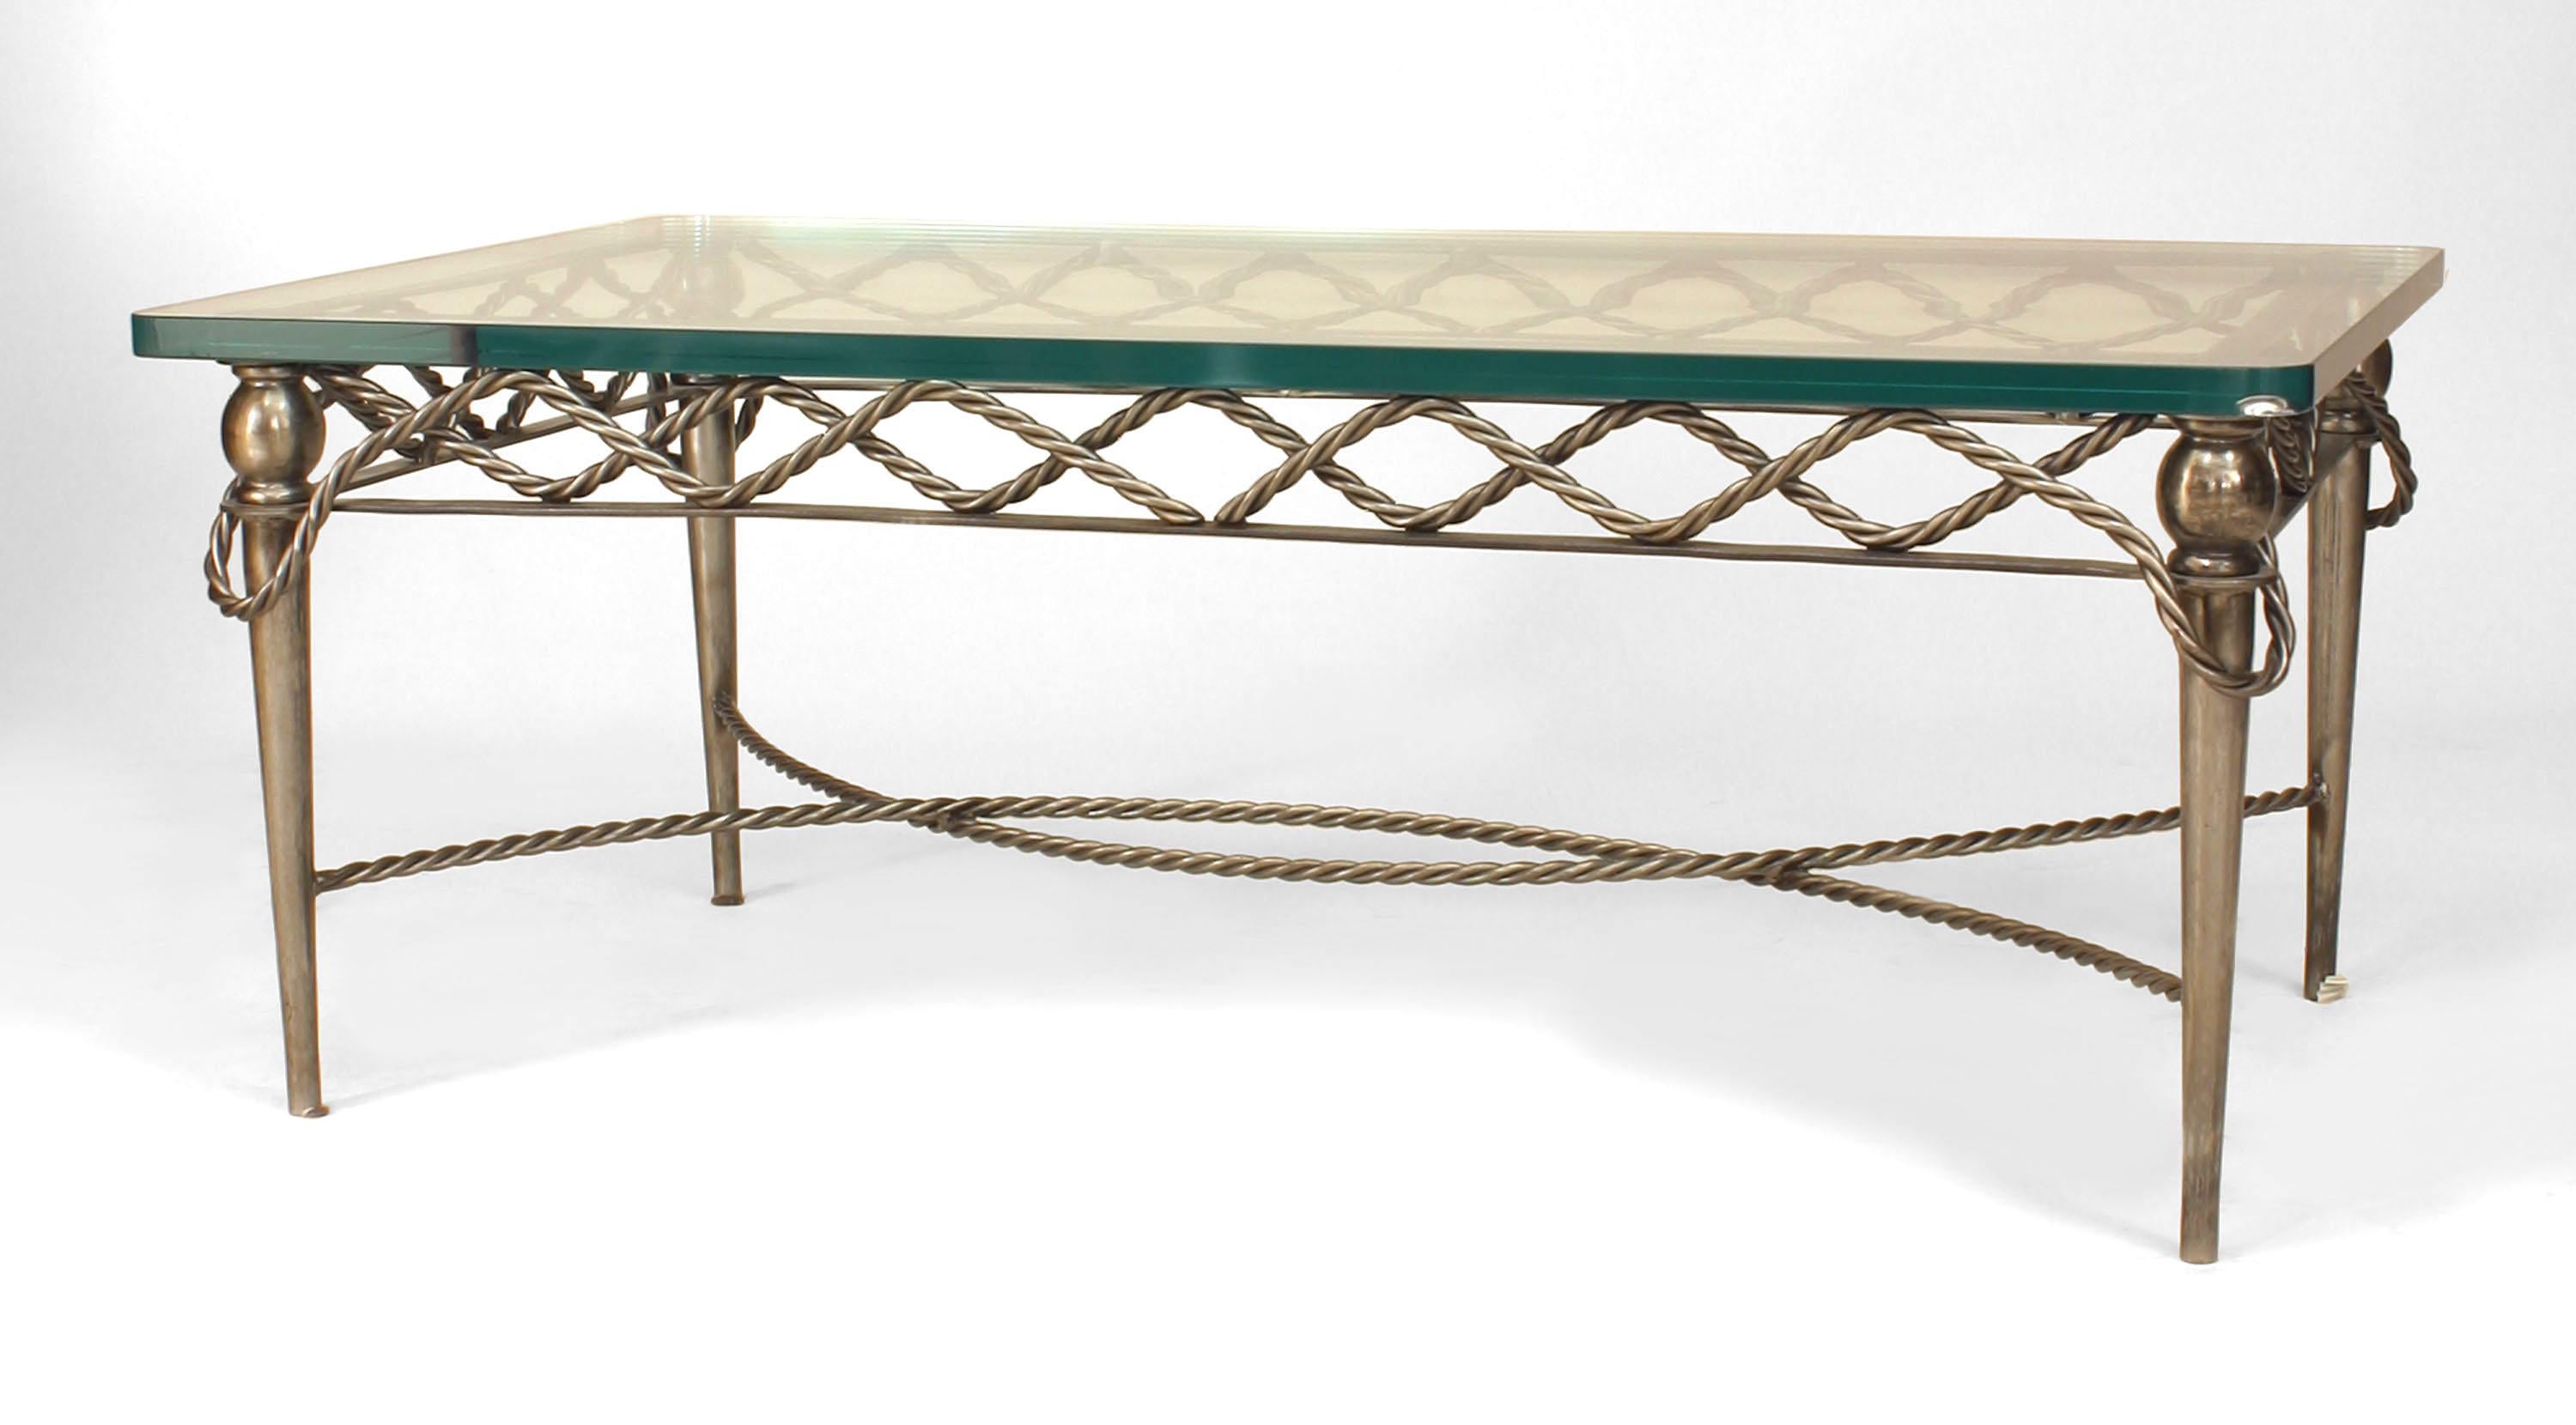 2 Italian Mid-Century Modern/1940s-style steel coffee tables with rope design frame and stretcher and one inch glass tops. (PRICED EACH).
 